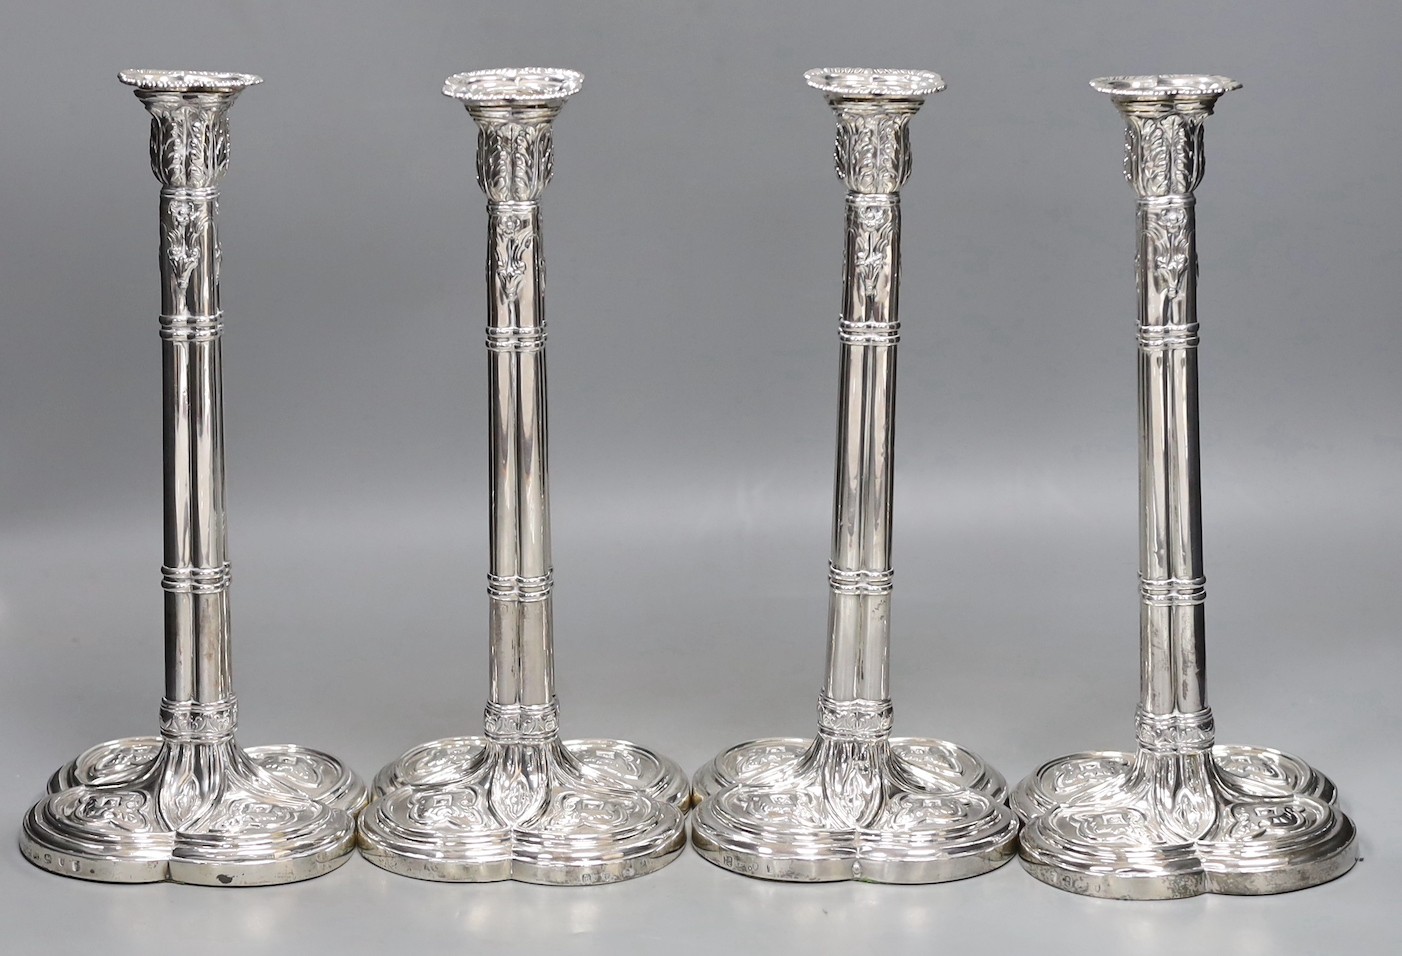 A set of four early George III silver gothic cluster column candlesticks, on cusped quatrefoil bases, by Hannam or Hammond & Carter, London, 1763, 28.8cm, weighted (holes).                                                